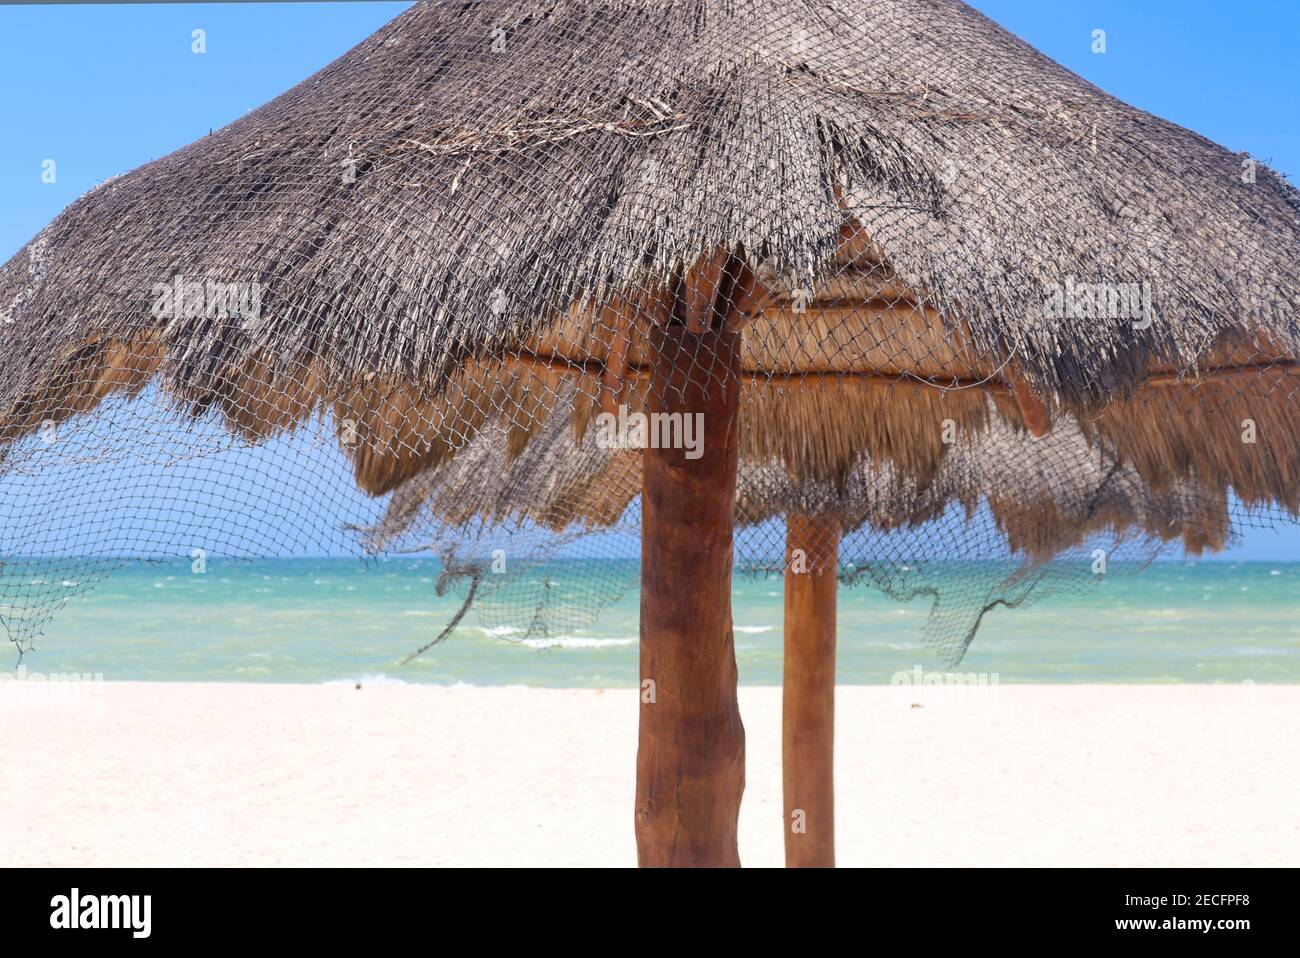 Netting on palapa umbrellas blow in breeze on white sand beach by ocean Stock Photo